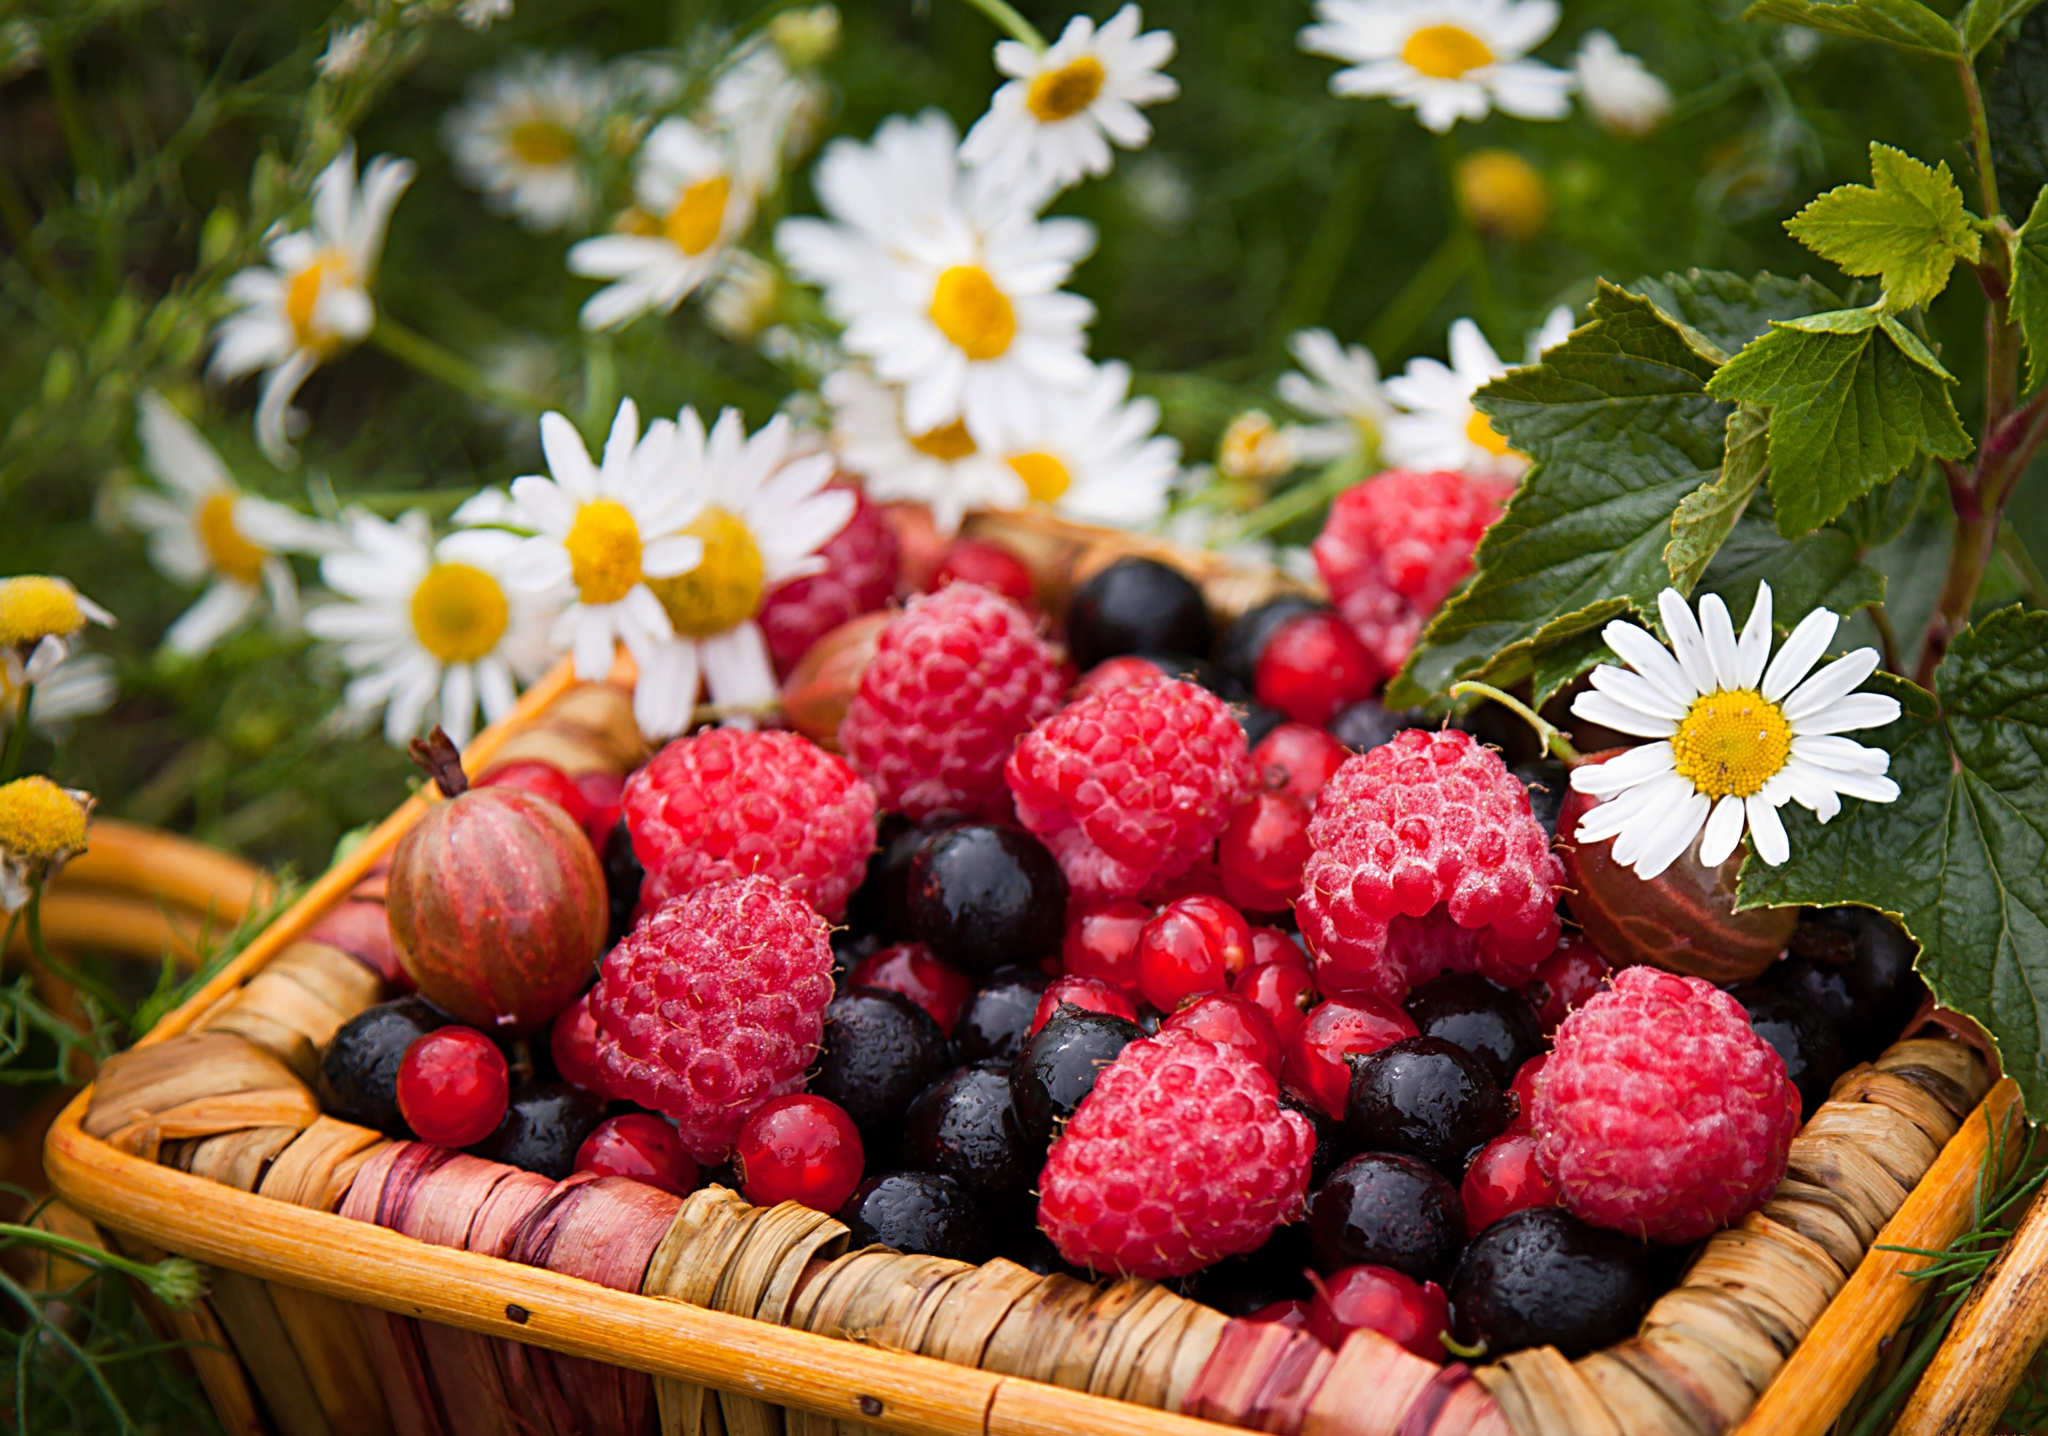 food, camomile, raspberry, berries, currant, gooseberry, basket lock screen backgrounds